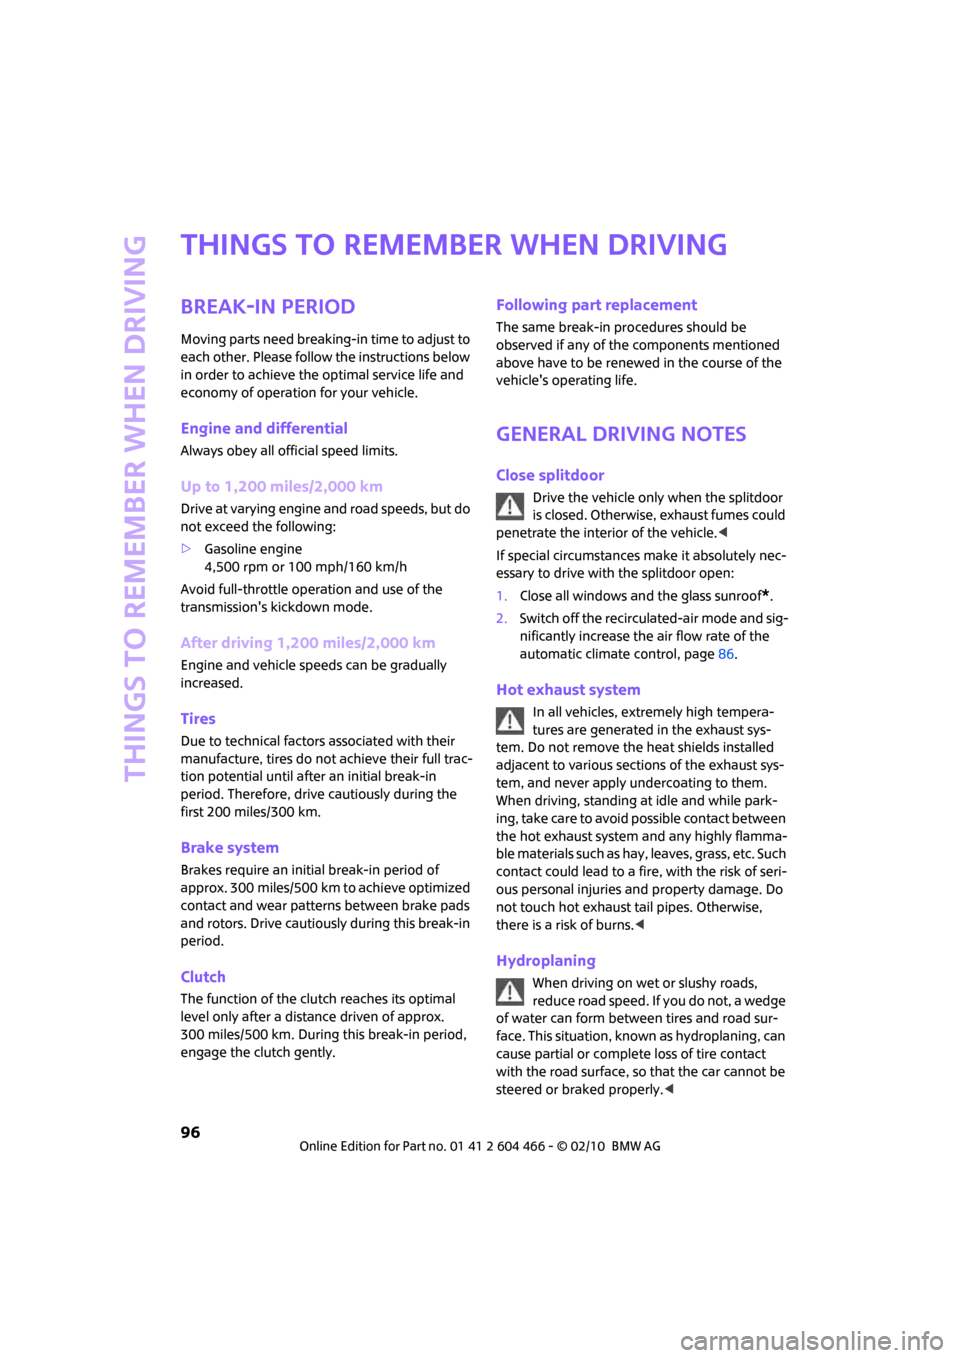 MINI Clubman 2010  Owners Manual (Mini Connected) Things to remember when driving
96
Things to remember when driving
Break-in period
Moving parts need breaking-in time to adjust to 
each other. Please follow the instructions below 
in order to achiev